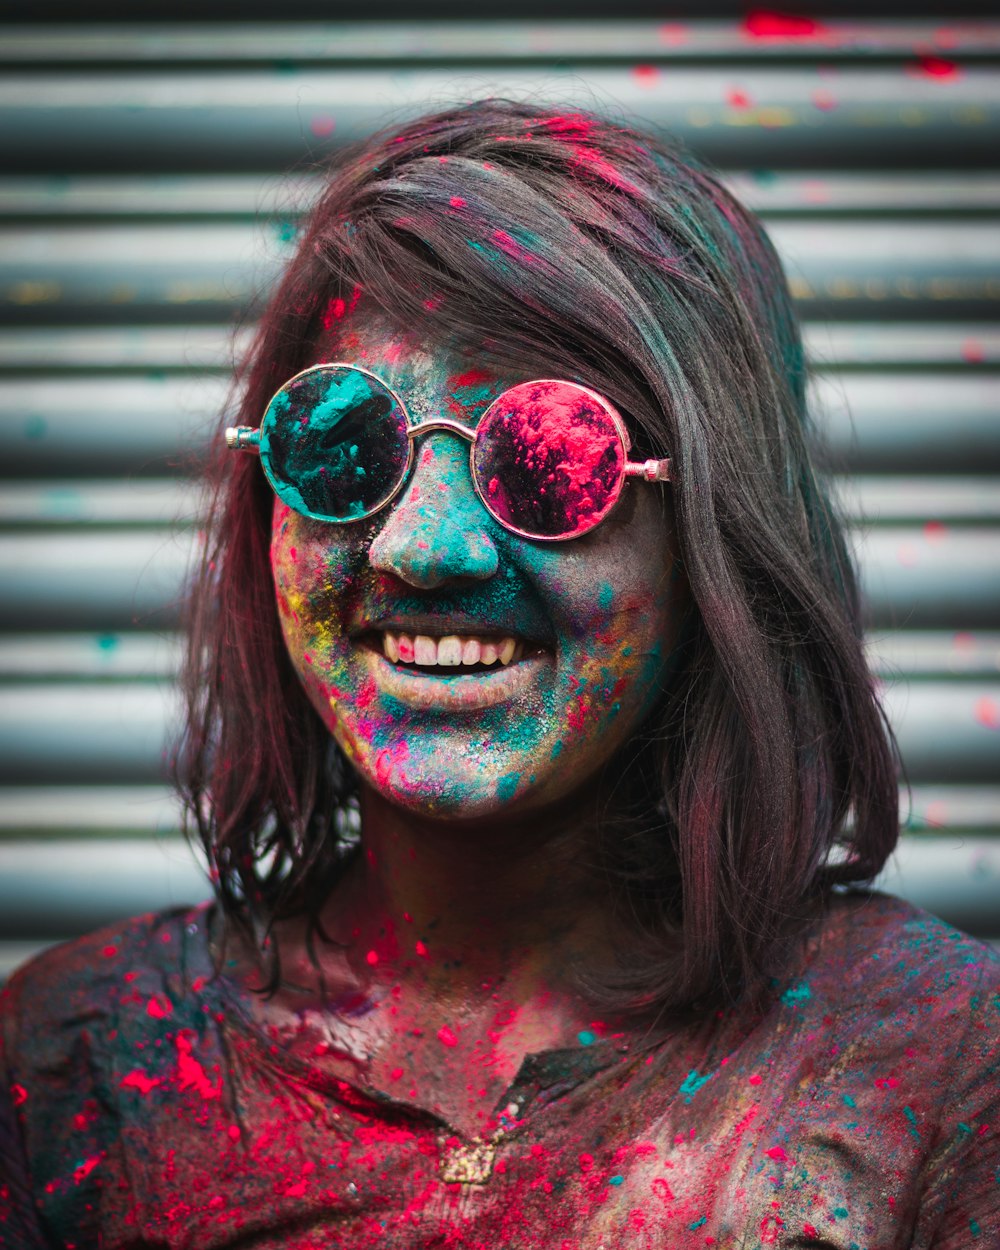 a woman with painted face and sunglasses posing for a photo